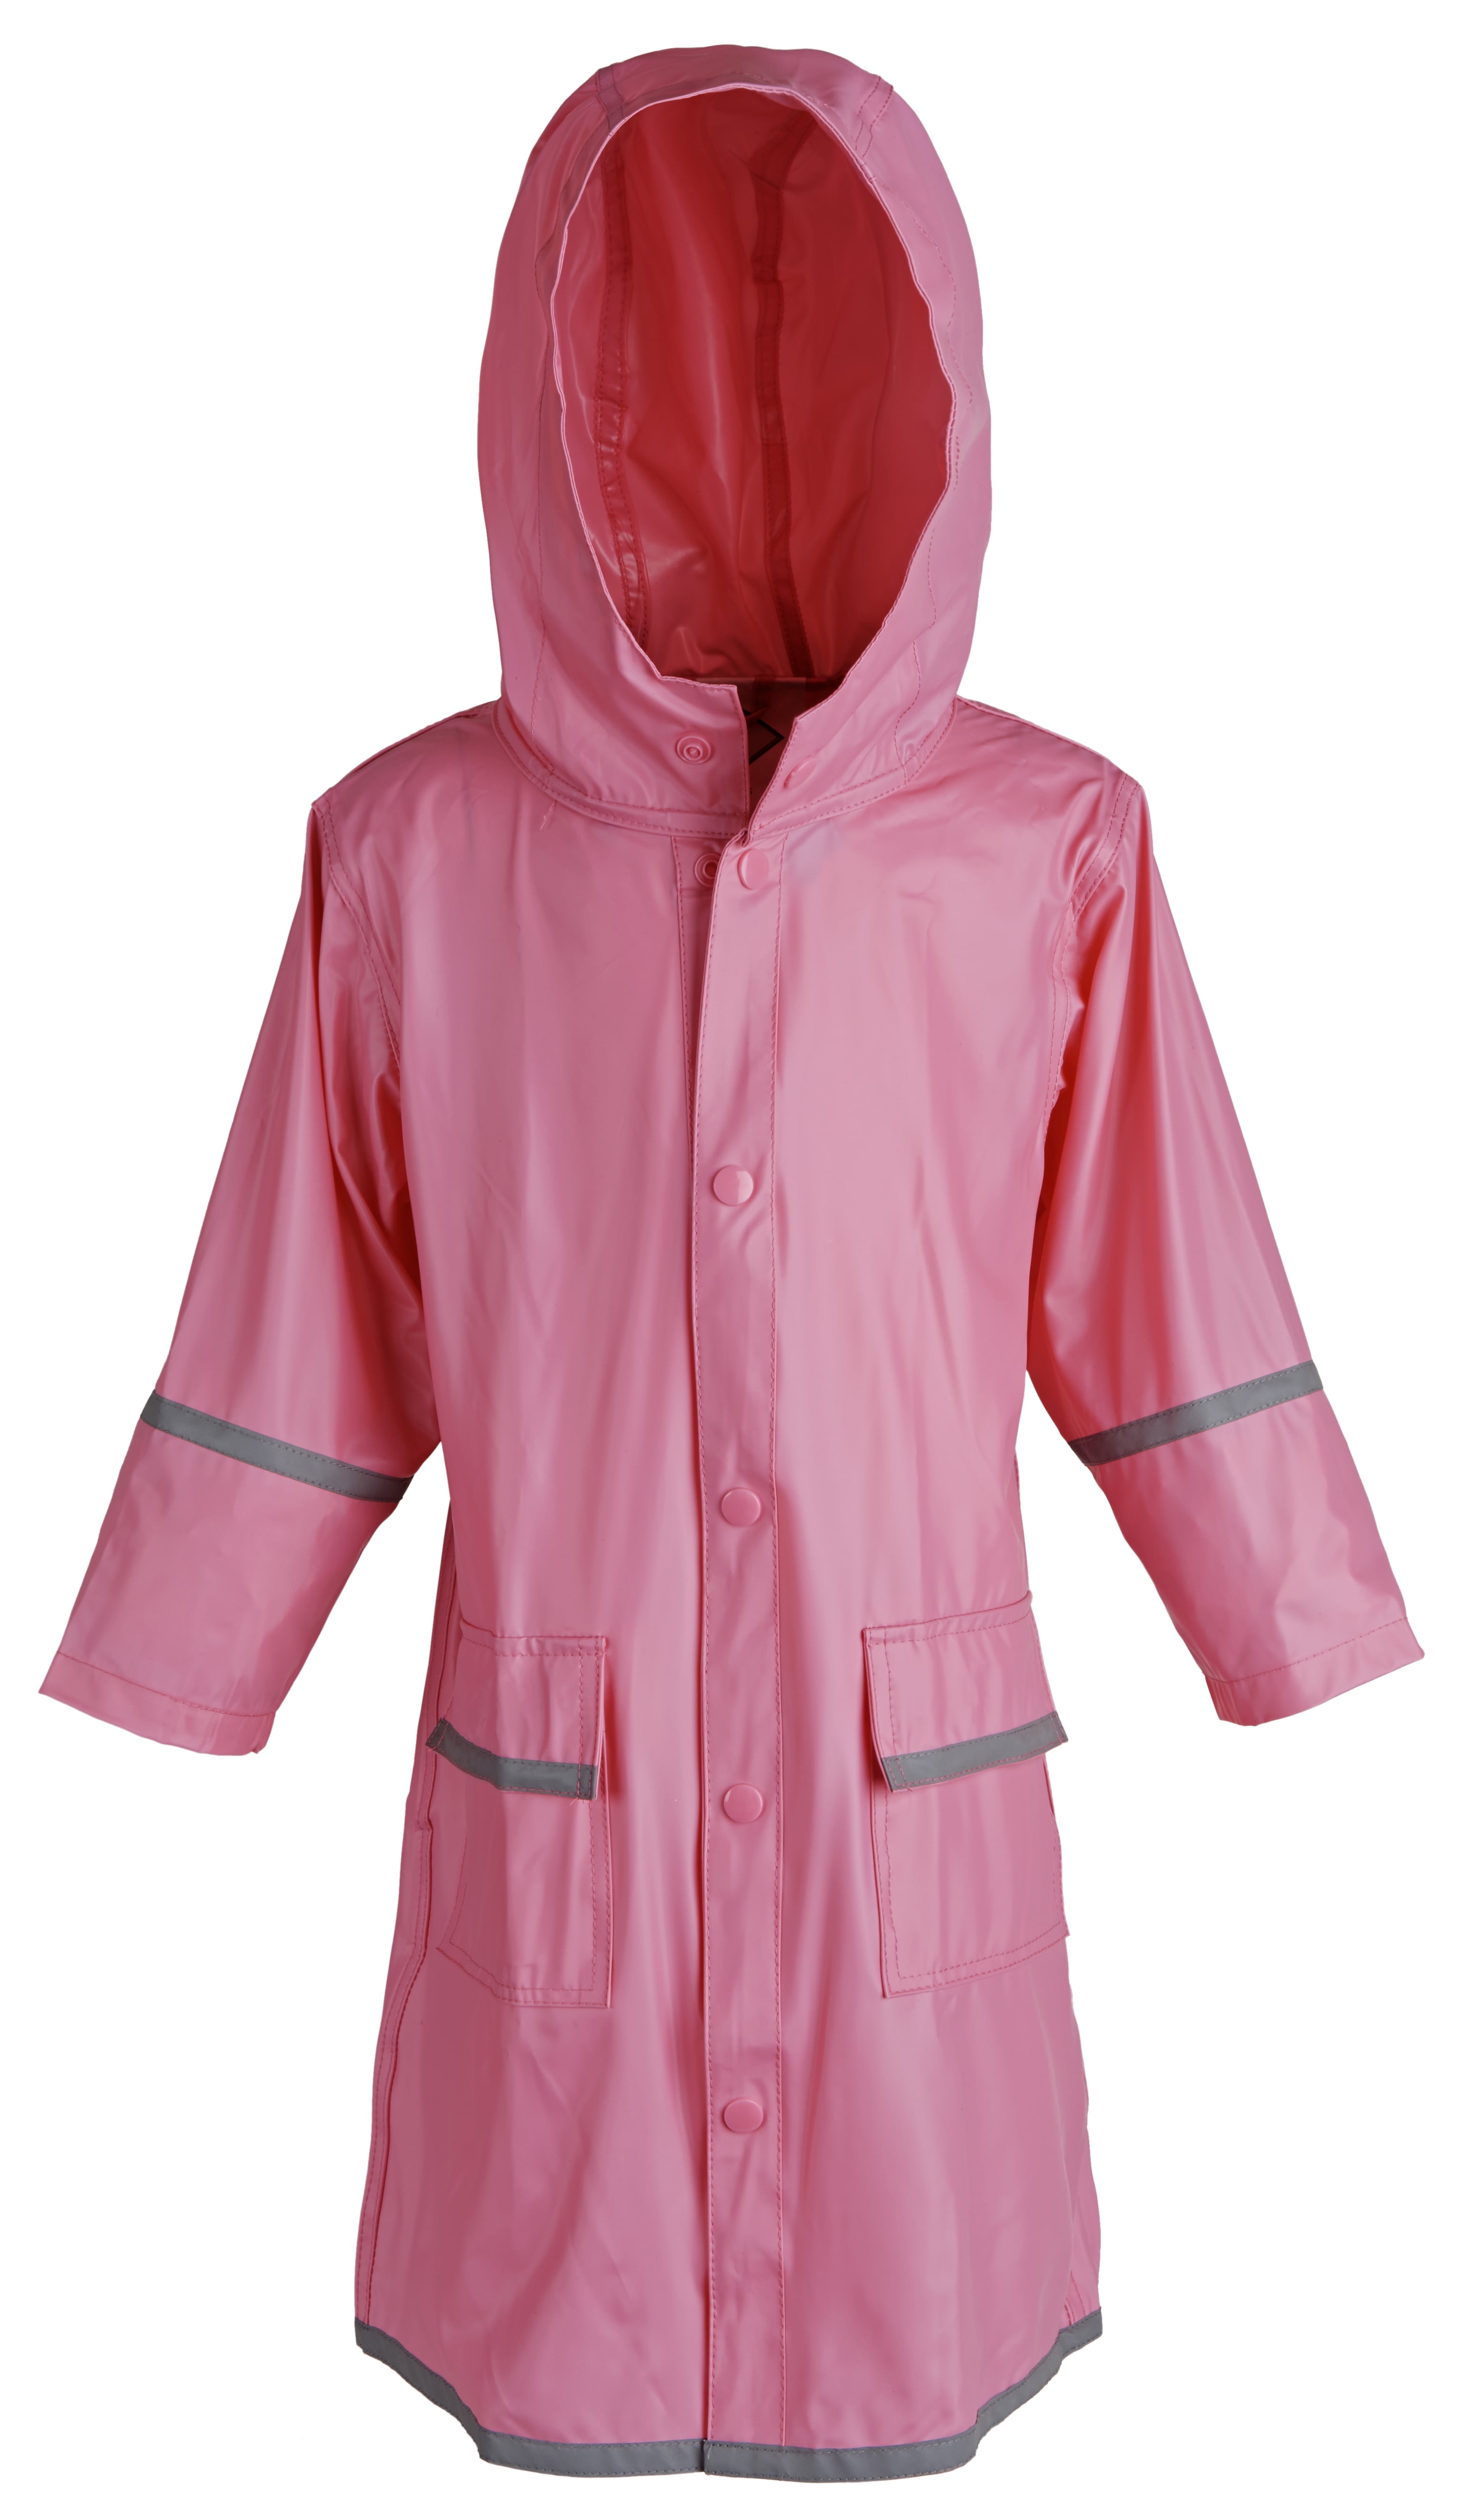 Fit Rite Boys Girls Hooded Waterproof Long Raincoat Full Length Rain Jacket for Children and Toddler with Reflective Stripes